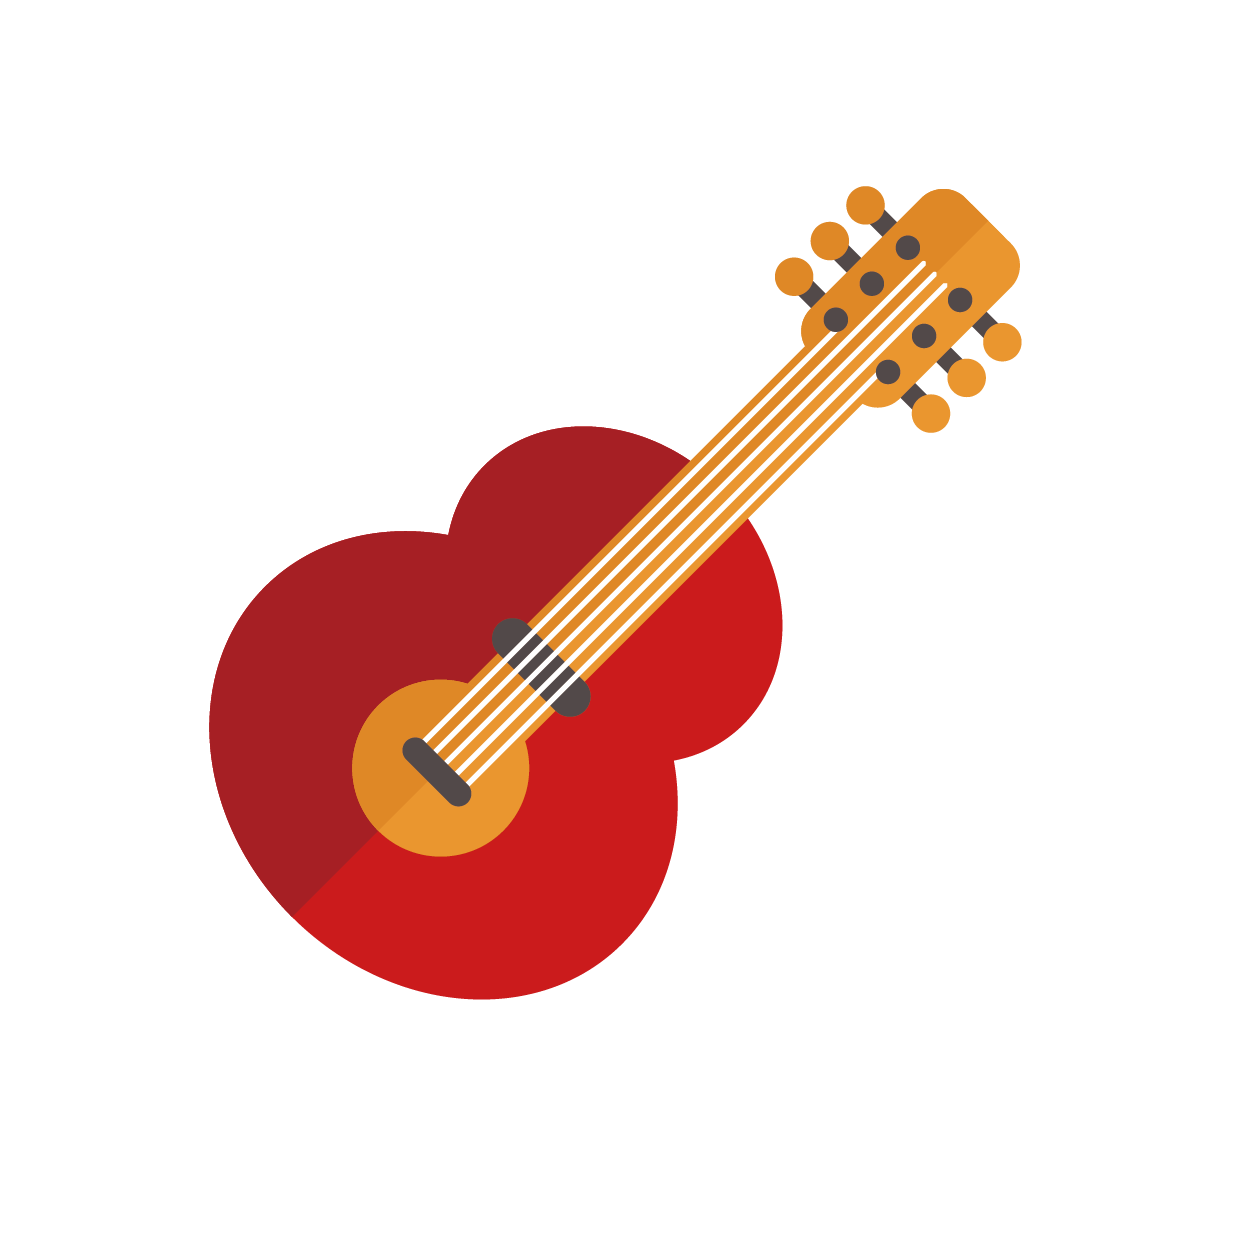 Guitar Acoustic Material Vector Flat PNG Image High Quality Clipart